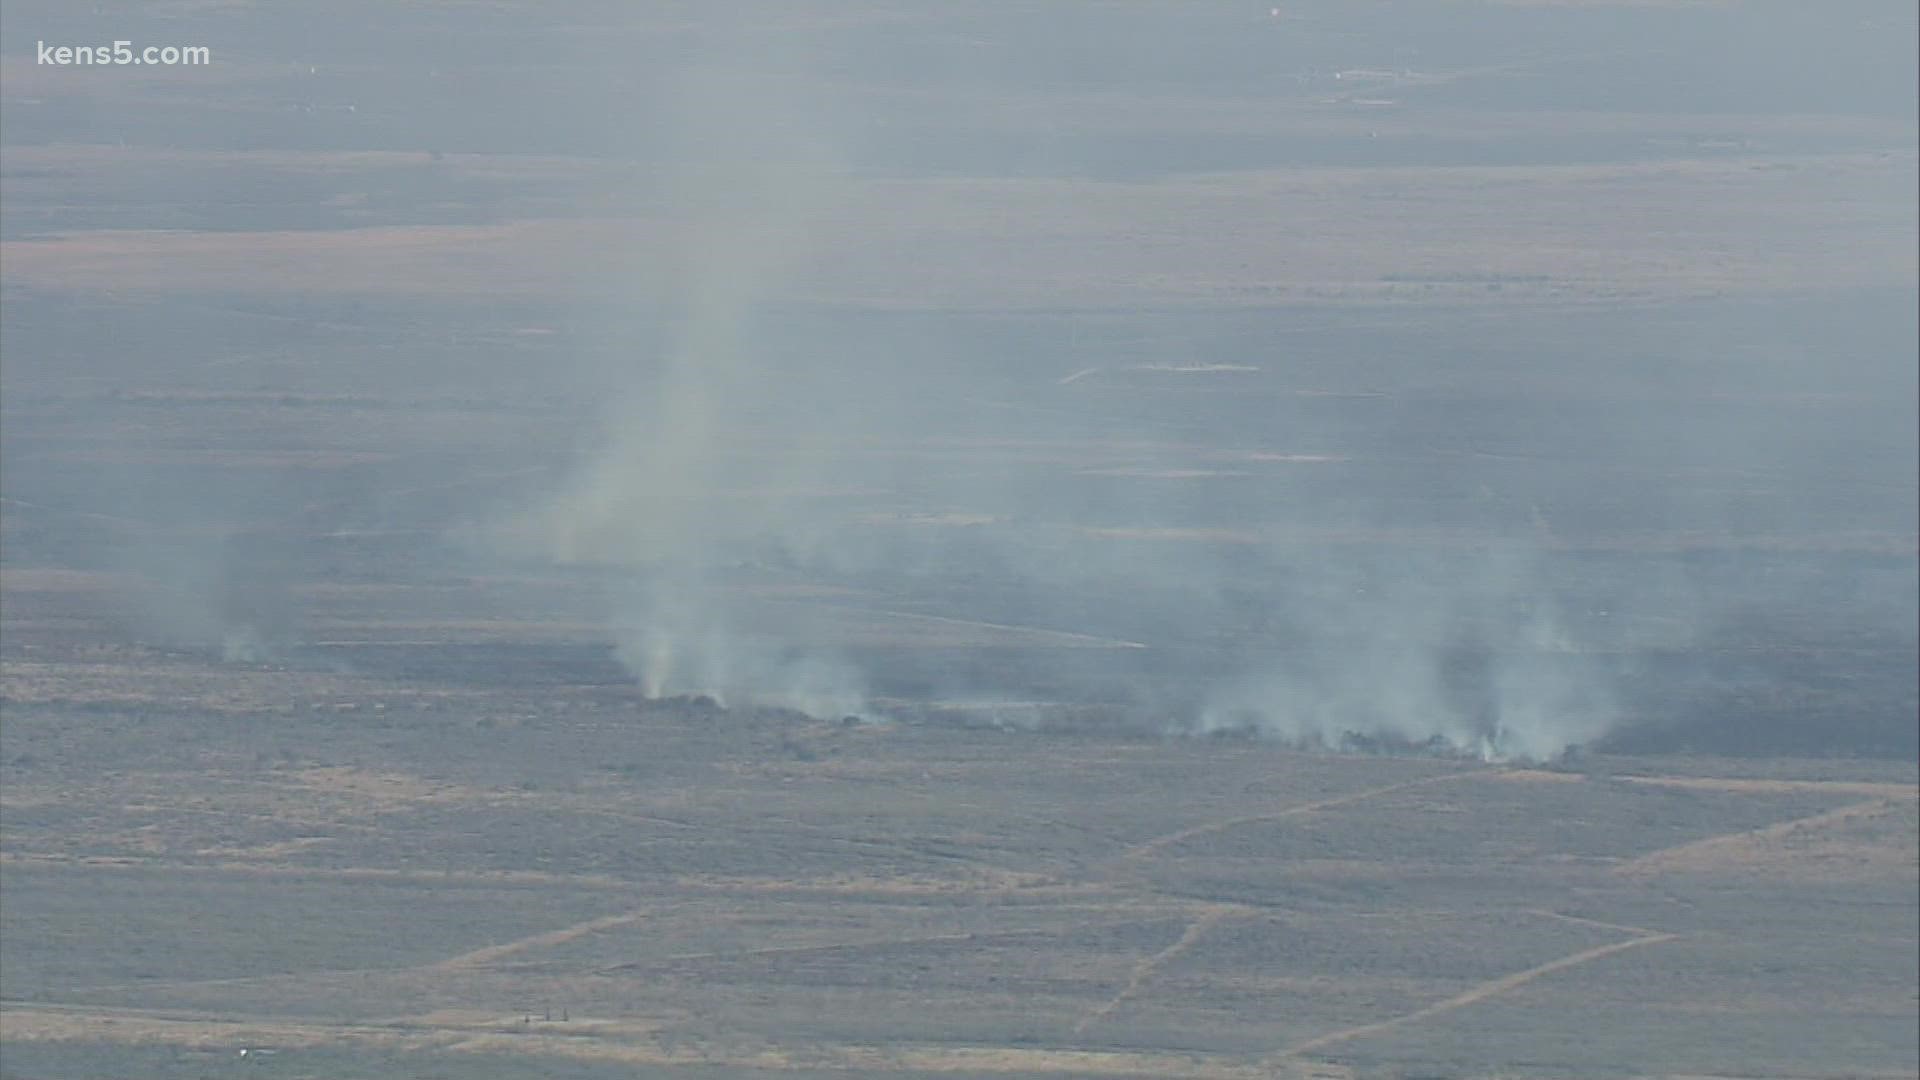 The fire is about 12 miles south of Poteet along FM RD 3387 & Hwy 16, near the town of Christine.